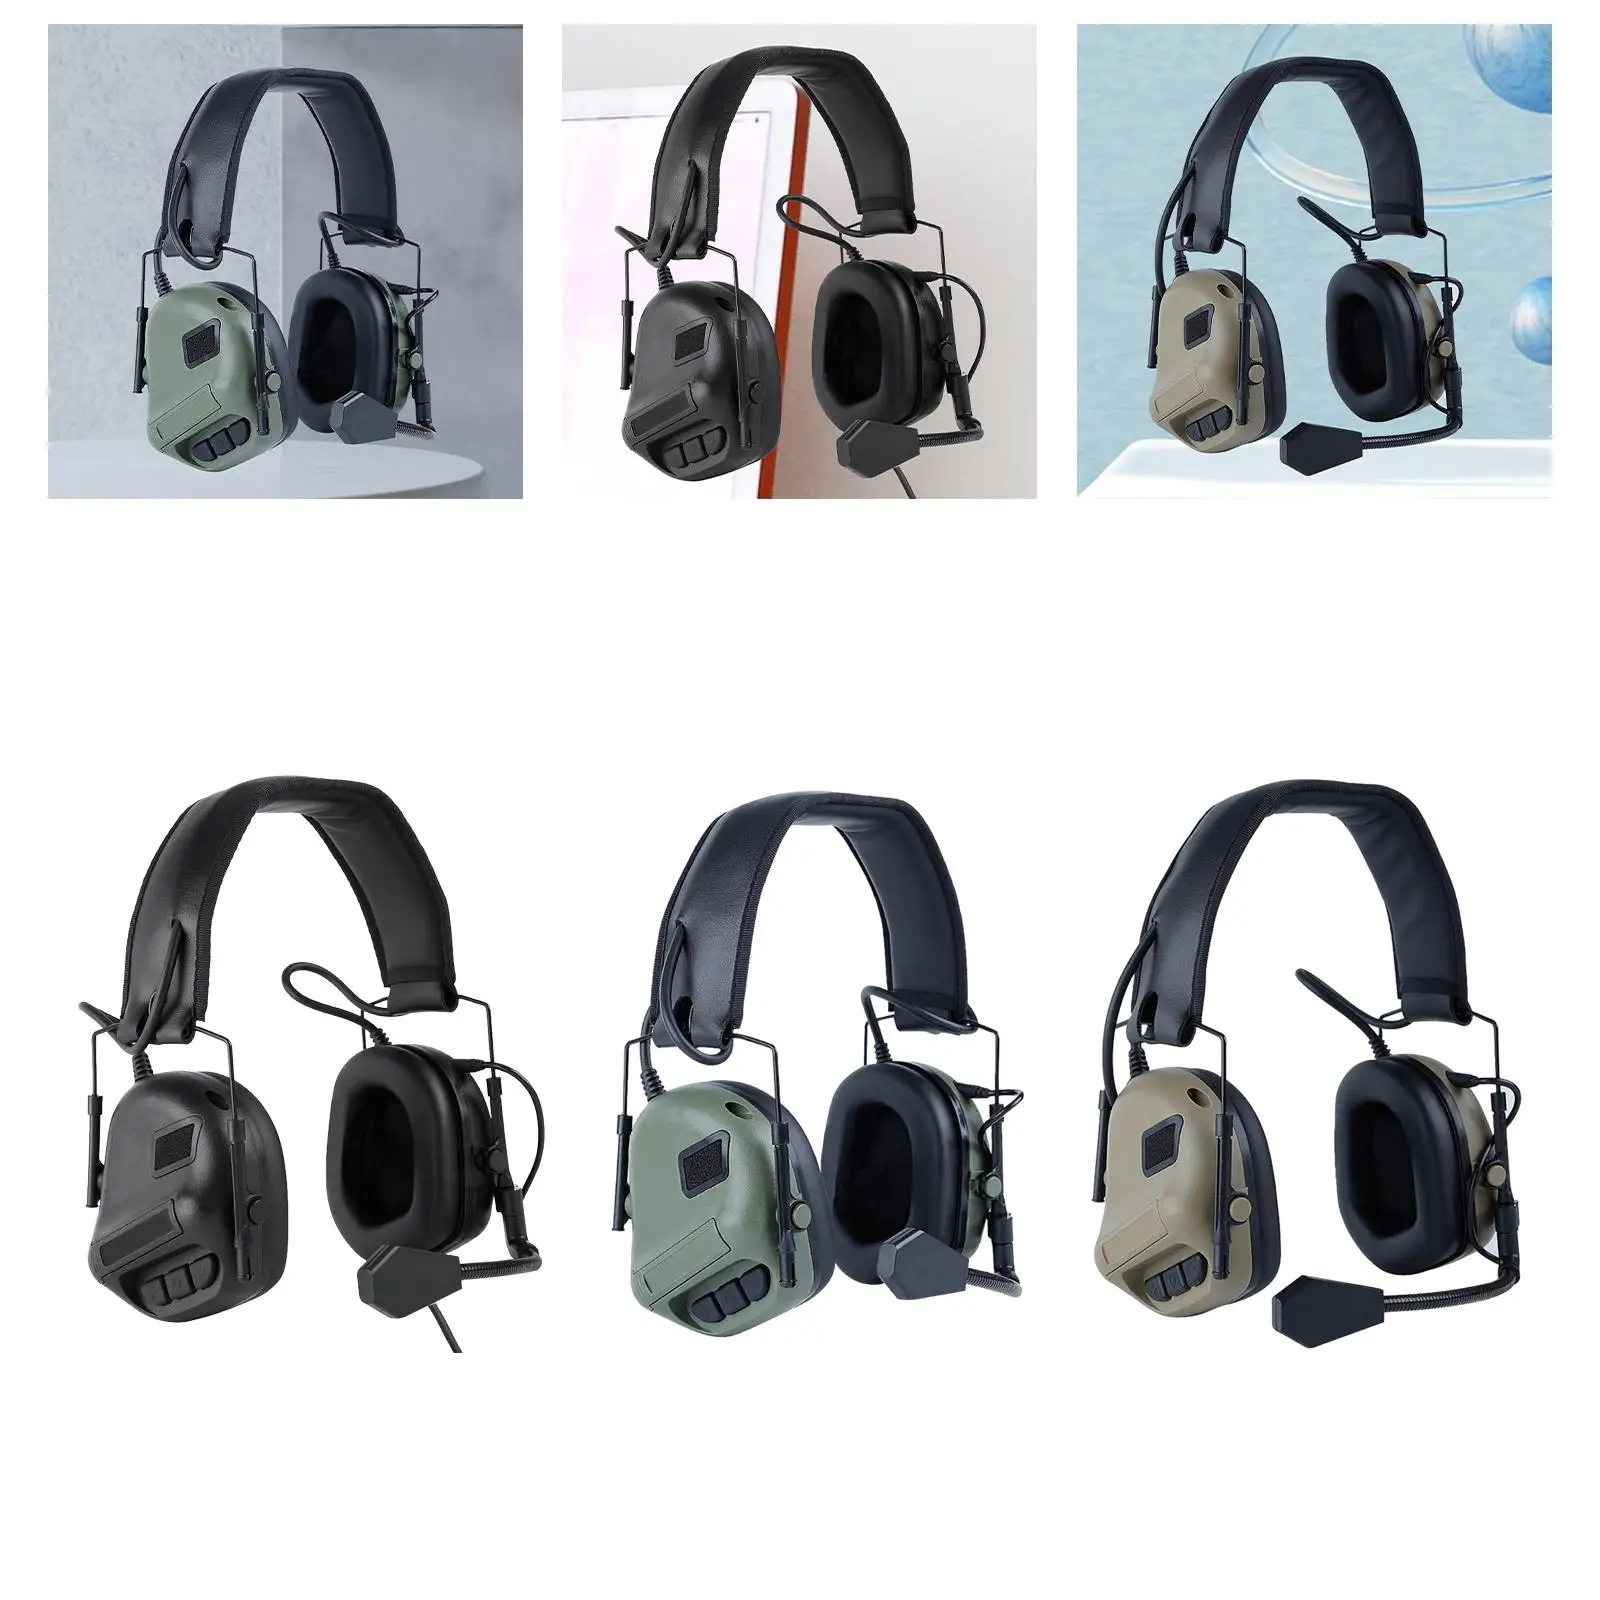 Hearing Ear Protection Foldable Soft Lightweight Protective Earmuffs for Manufacturing Lawn Mowing Office Studying Construction